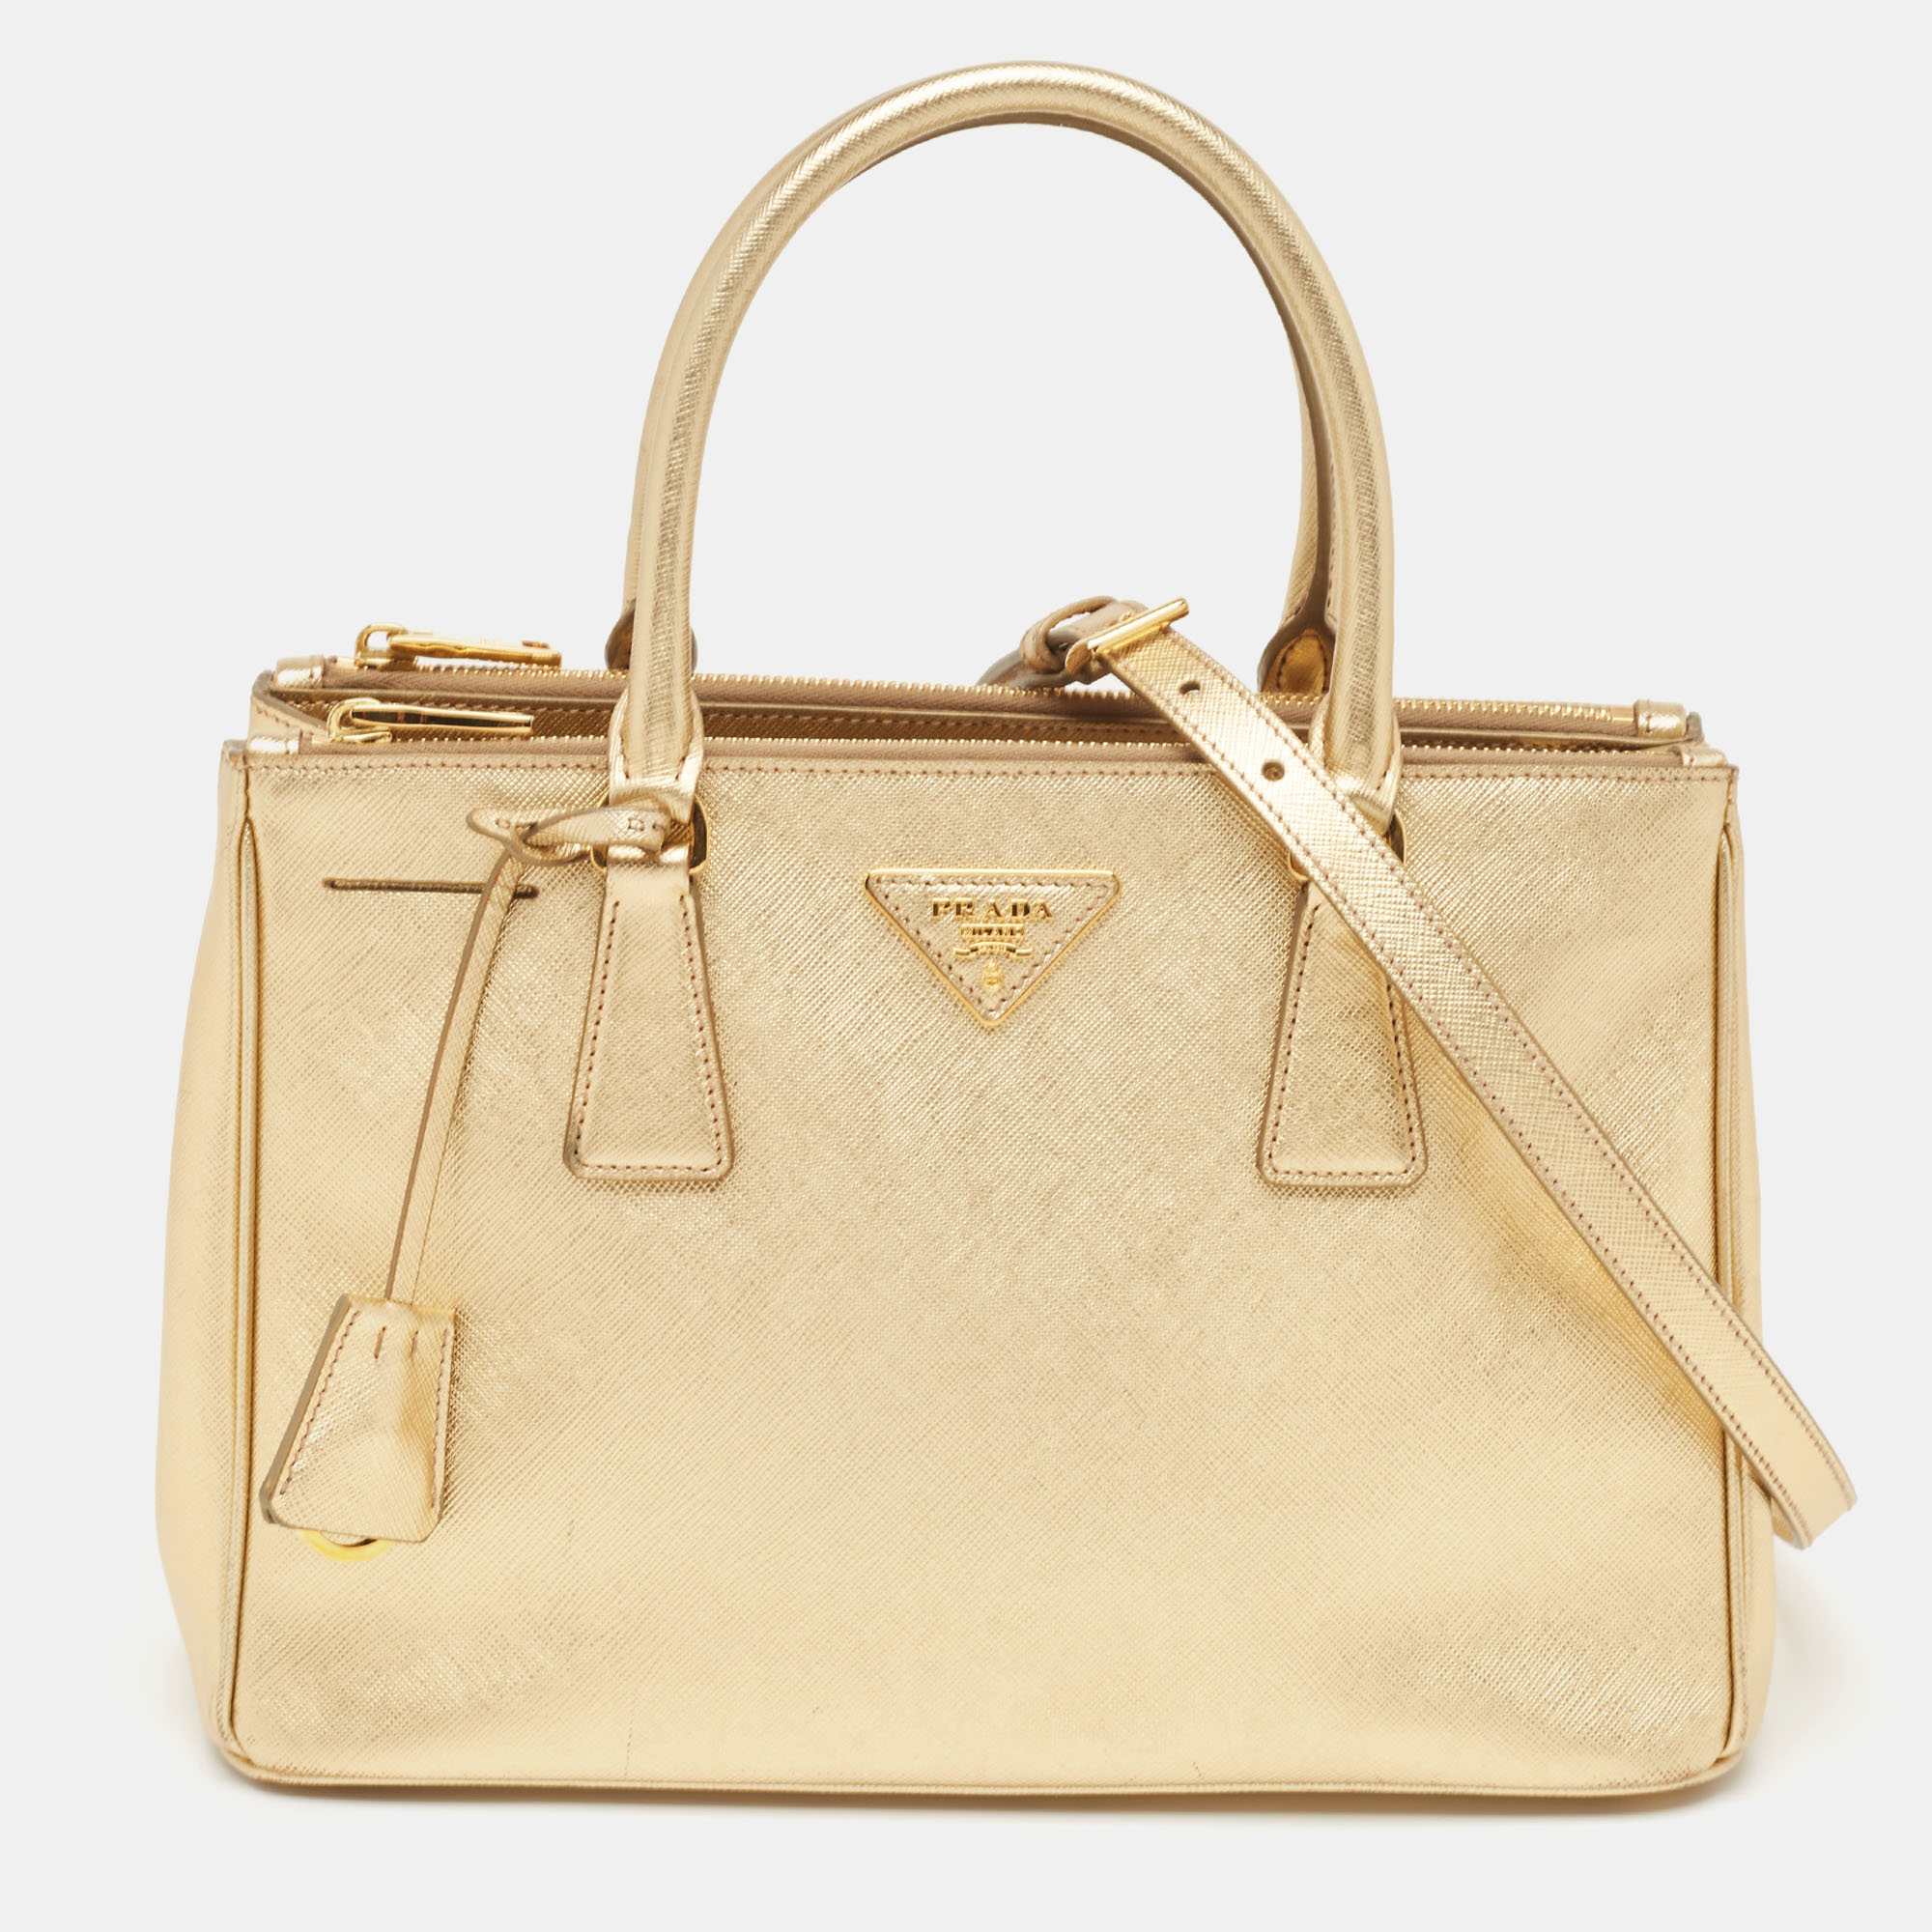 This Prada gold tote is an example of the brands fine designs that are skillfully crafted to project a classic charm. It is a functional creation with an elevating appeal.